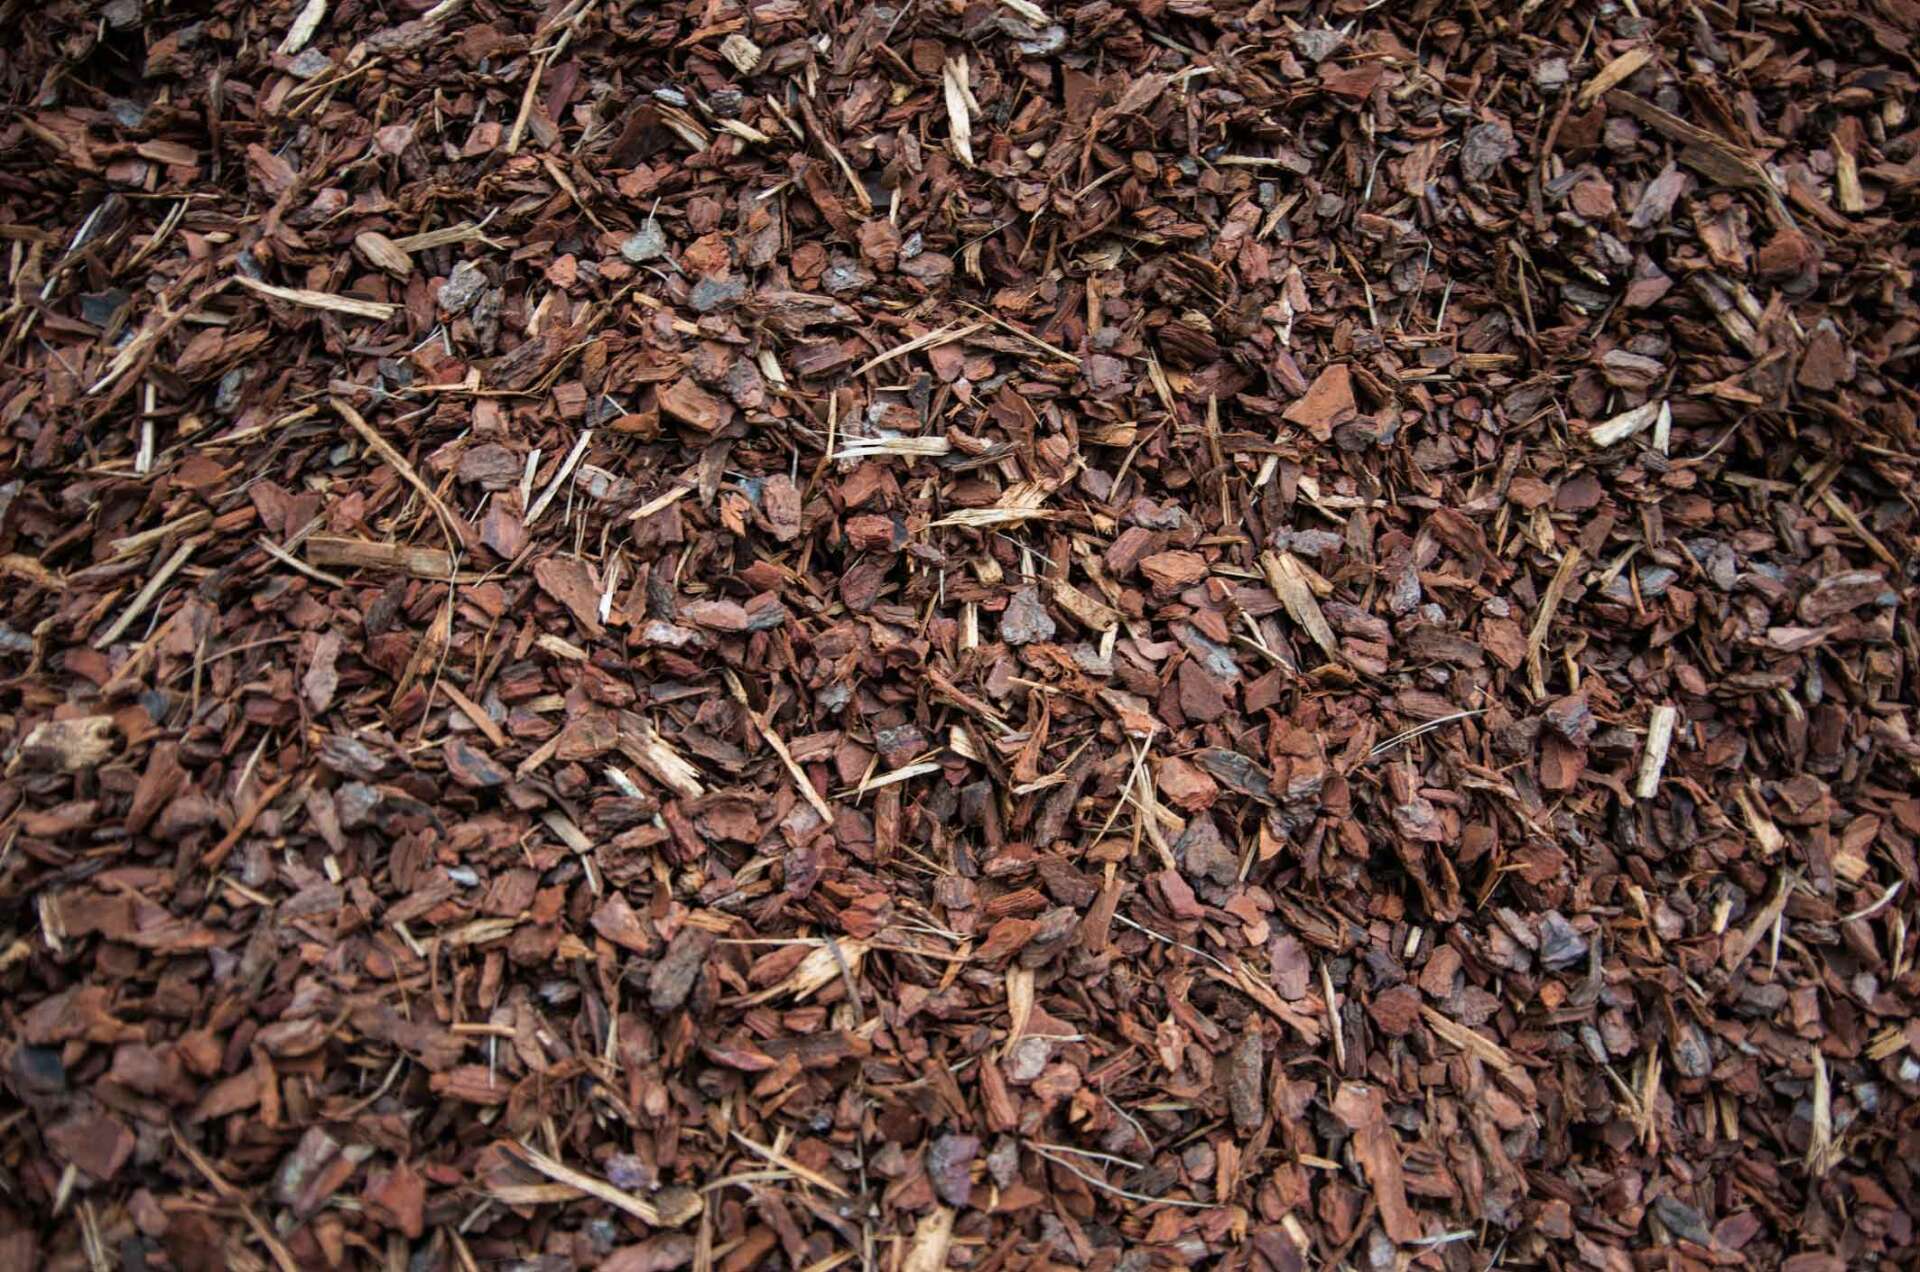 A Pile Of Wood Chips To Be Used As Landscaping Mulch - Warren, MI - Maple Lane Pest Control